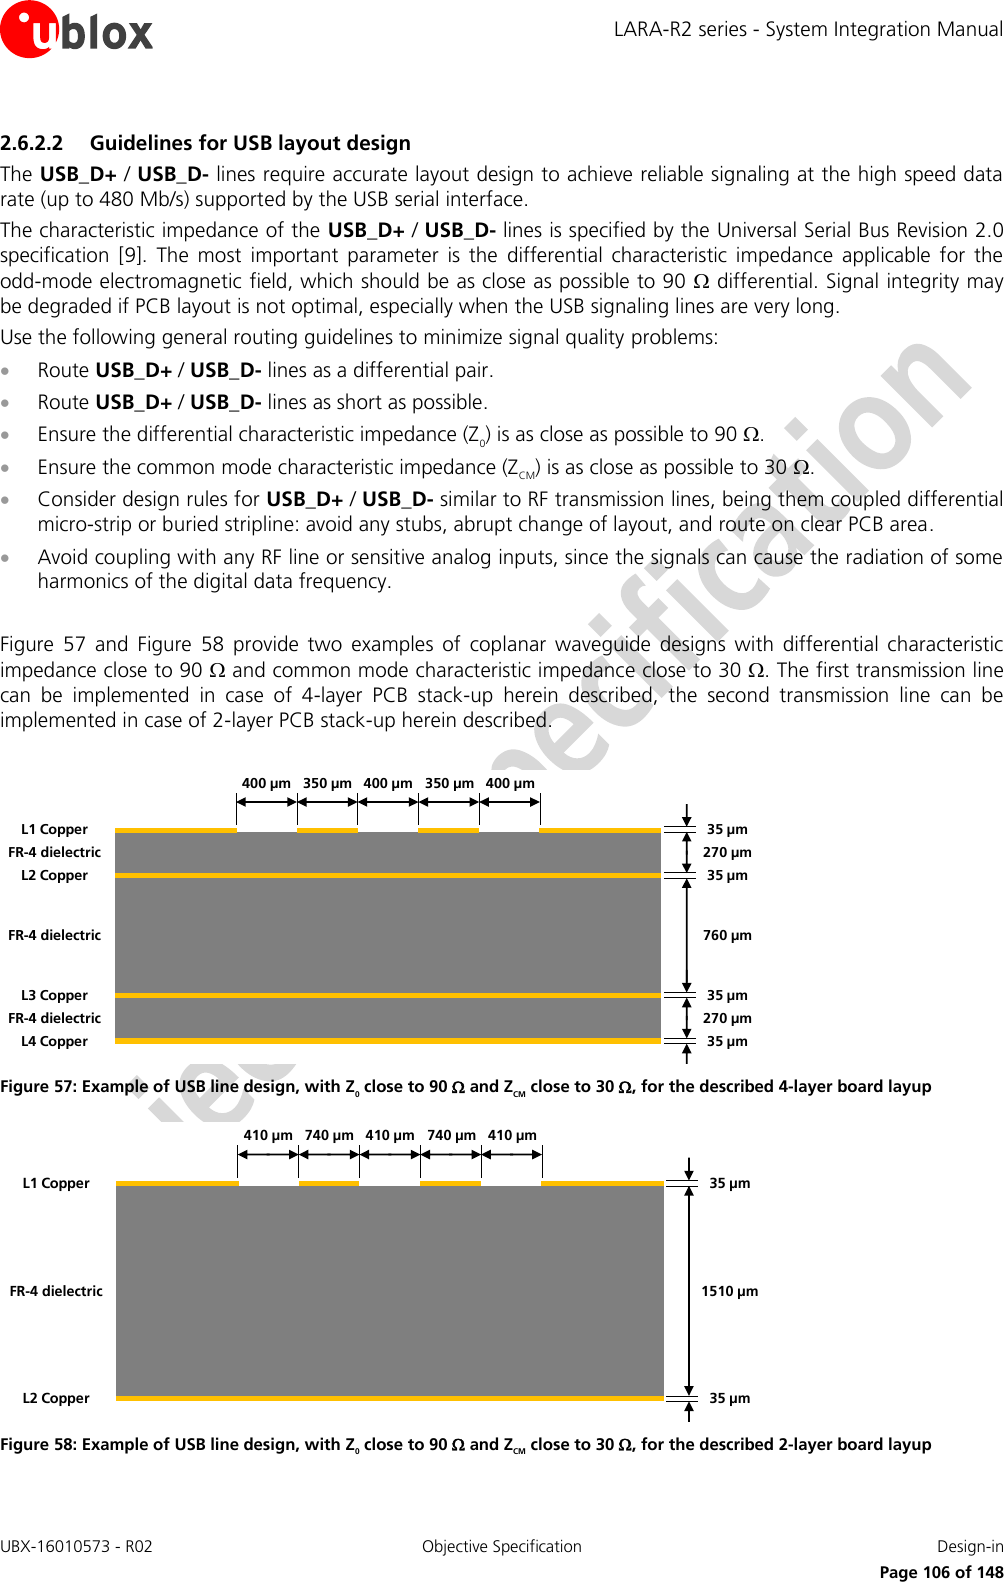 LARA-R2 series - System Integration Manual UBX-16010573 - R02  Objective Specification  Design-in     Page 106 of 148 2.6.2.2 Guidelines for USB layout design The USB_D+ / USB_D- lines require accurate layout design to achieve reliable signaling at the high speed data rate (up to 480 Mb/s) supported by the USB serial interface. The characteristic impedance of the USB_D+ / USB_D- lines is specified by the Universal Serial Bus Revision 2.0 specification  [9].  The  most  important  parameter  is  the  differential  characteristic  impedance  applicable  for  the odd-mode electromagnetic field, which should be as close as possible to 90  differential. Signal integrity may be degraded if PCB layout is not optimal, especially when the USB signaling lines are very long. Use the following general routing guidelines to minimize signal quality problems:  Route USB_D+ / USB_D- lines as a differential pair.  Route USB_D+ / USB_D- lines as short as possible.  Ensure the differential characteristic impedance (Z0) is as close as possible to 90 .  Ensure the common mode characteristic impedance (ZCM) is as close as possible to 30 .  Consider design rules for USB_D+ / USB_D- similar to RF transmission lines, being them coupled differential micro-strip or buried stripline: avoid any stubs, abrupt change of layout, and route on clear PCB area.  Avoid coupling with any RF line or sensitive analog inputs, since the signals can cause the radiation of some harmonics of the digital data frequency.  Figure  57  and  Figure  58  provide  two  examples  of  coplanar  waveguide  designs  with  differential  characteristic impedance close to 90  and common mode characteristic impedance close to 30 . The first transmission line can  be  implemented  in  case  of  4-layer  PCB  stack-up  herein  described,  the  second  transmission  line  can  be implemented in case of 2-layer PCB stack-up herein described.  35 µm35 µm35 µm35 µm270 µm270 µm760 µmL1 CopperL3 CopperL2 CopperL4 CopperFR-4 dielectricFR-4 dielectricFR-4 dielectric350 µm 400 µm400 µm350 µm400 µm Figure 57: Example of USB line design, with Z0 close to 90  and ZCM close to 30 , for the described 4-layer board layup 35 µm35 µm1510 µmL2 CopperL1 CopperFR-4 dielectric740 µm 410 µm410 µm740 µm410 µm Figure 58: Example of USB line design, with Z0 close to 90  and ZCM close to 30 , for the described 2-layer board layup  